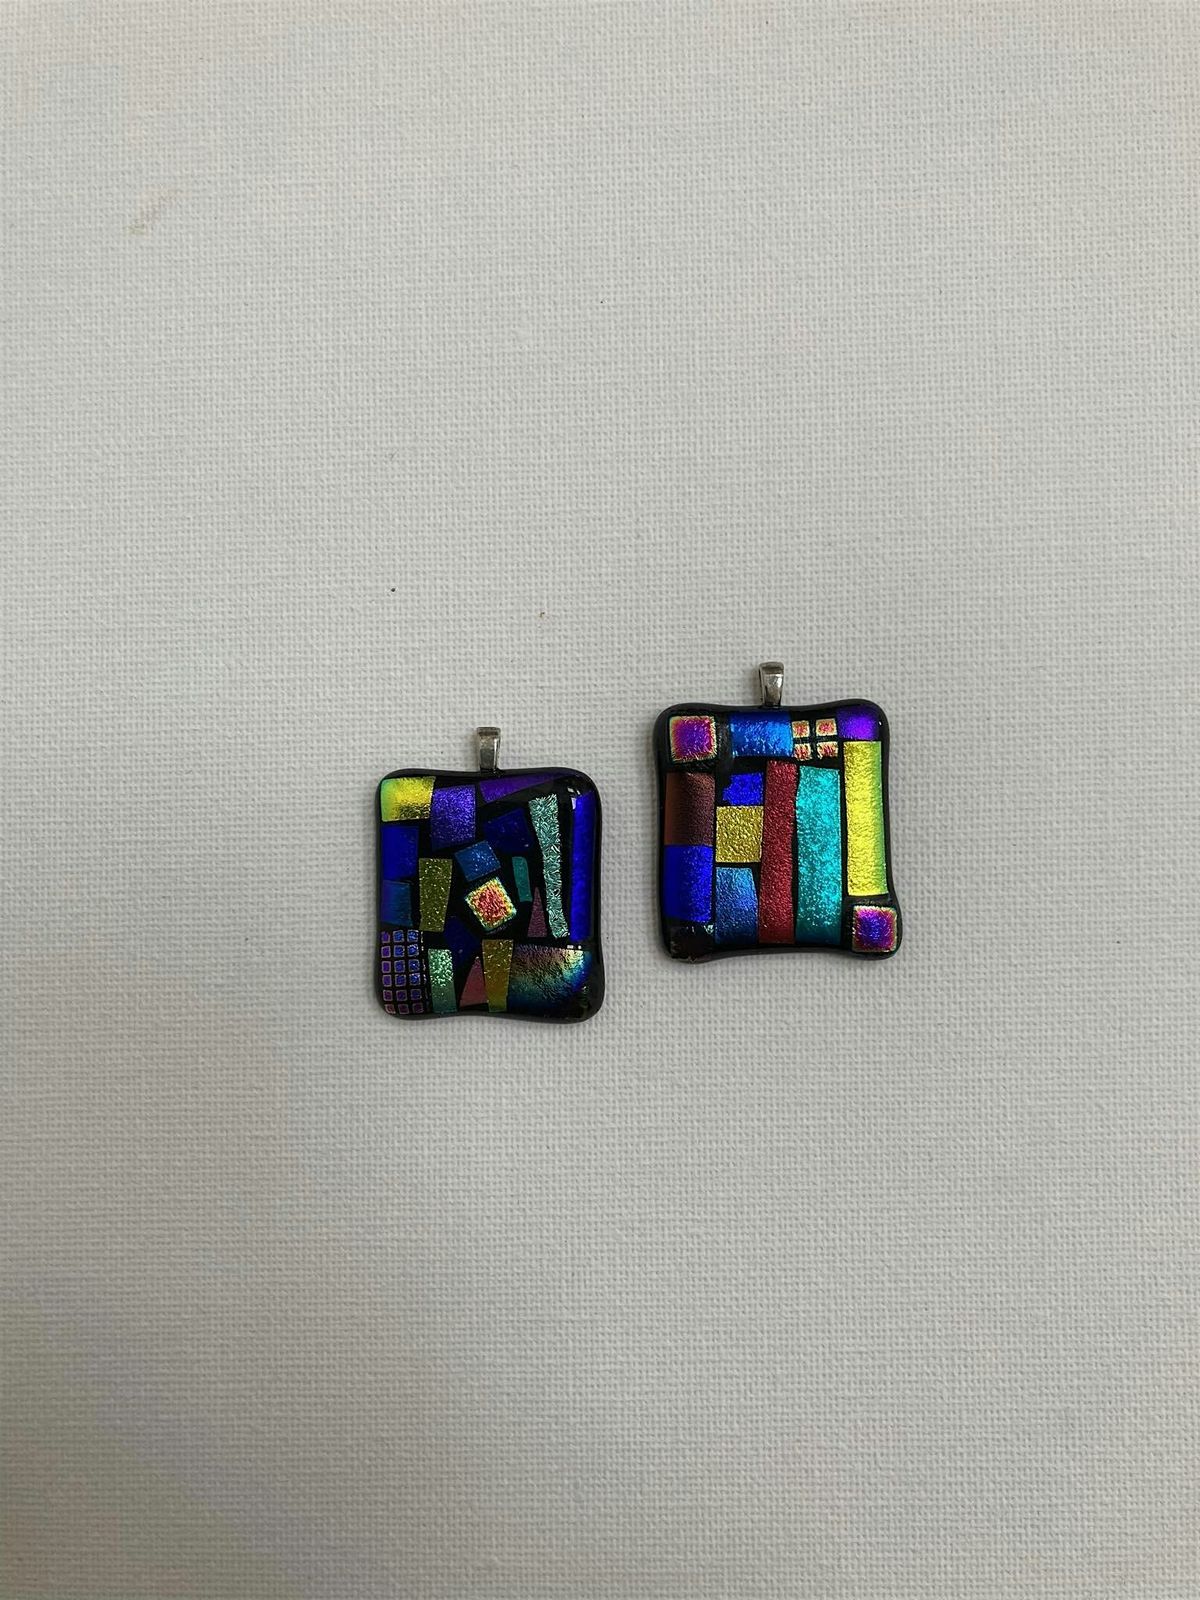 Make your own glass coasters and dichroic pendant in my workshops